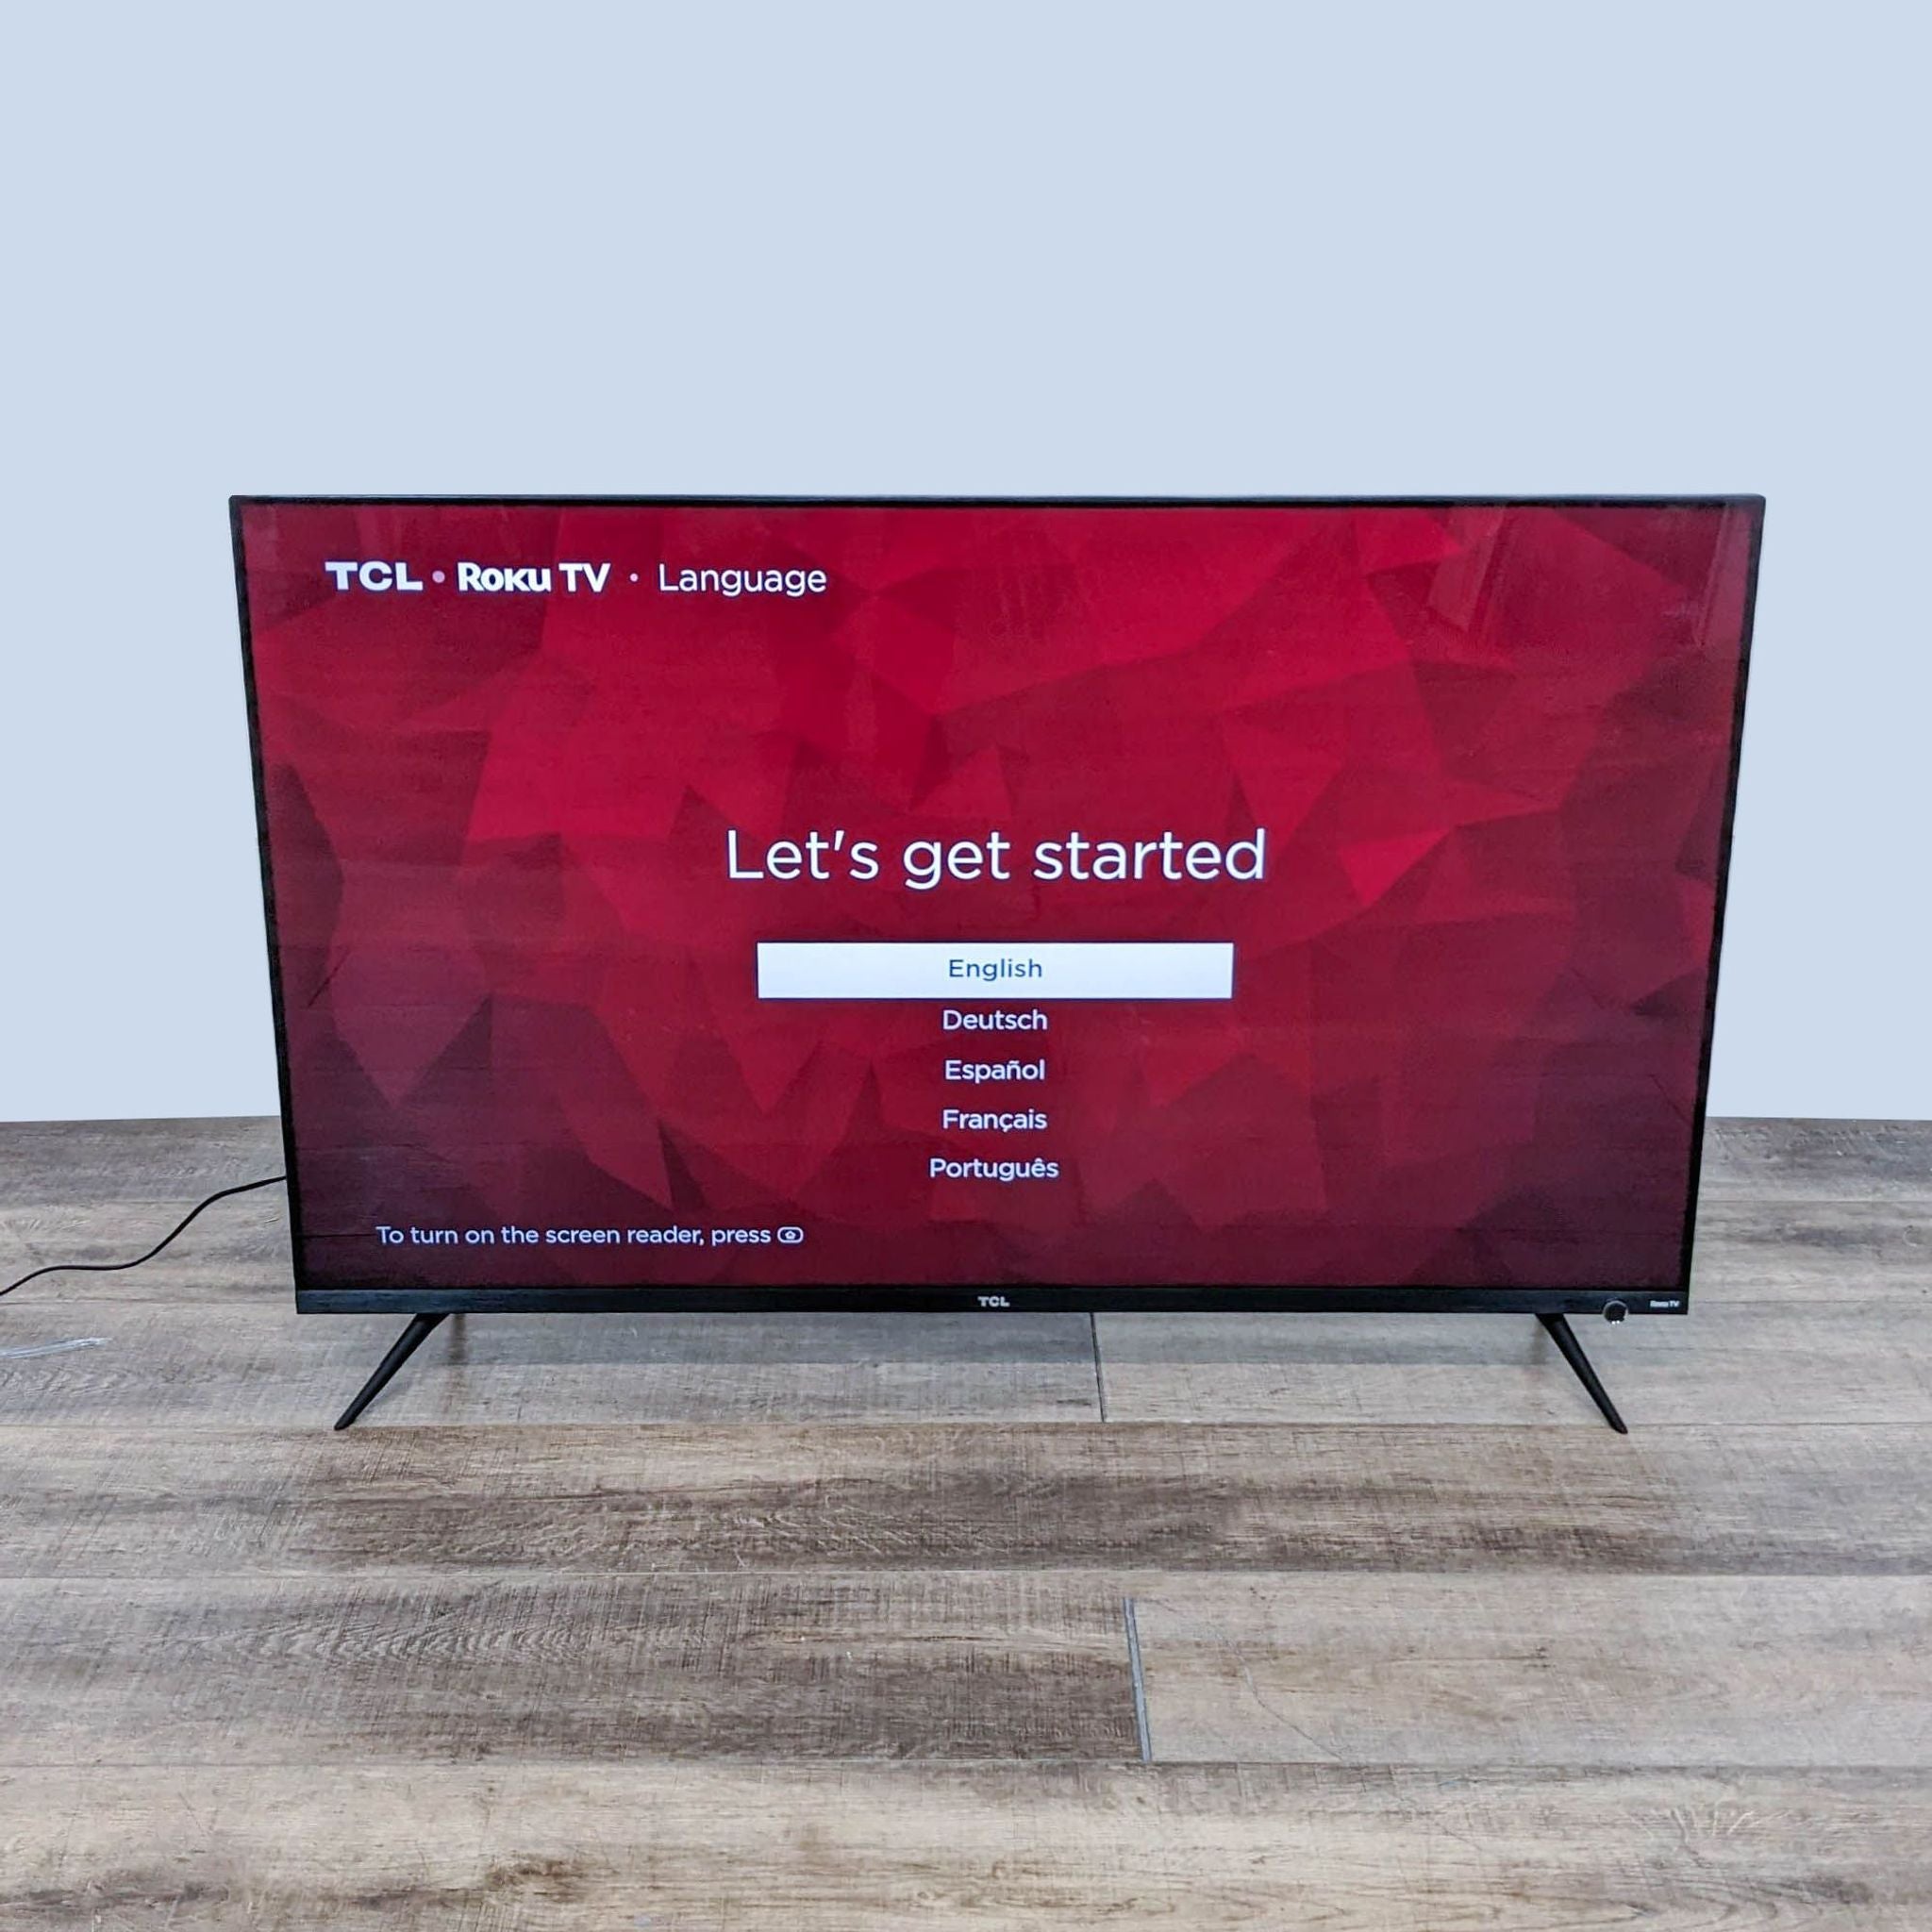 TCL Roku TV on startup screen with language selection options, standing on a wooden floor against a white background.